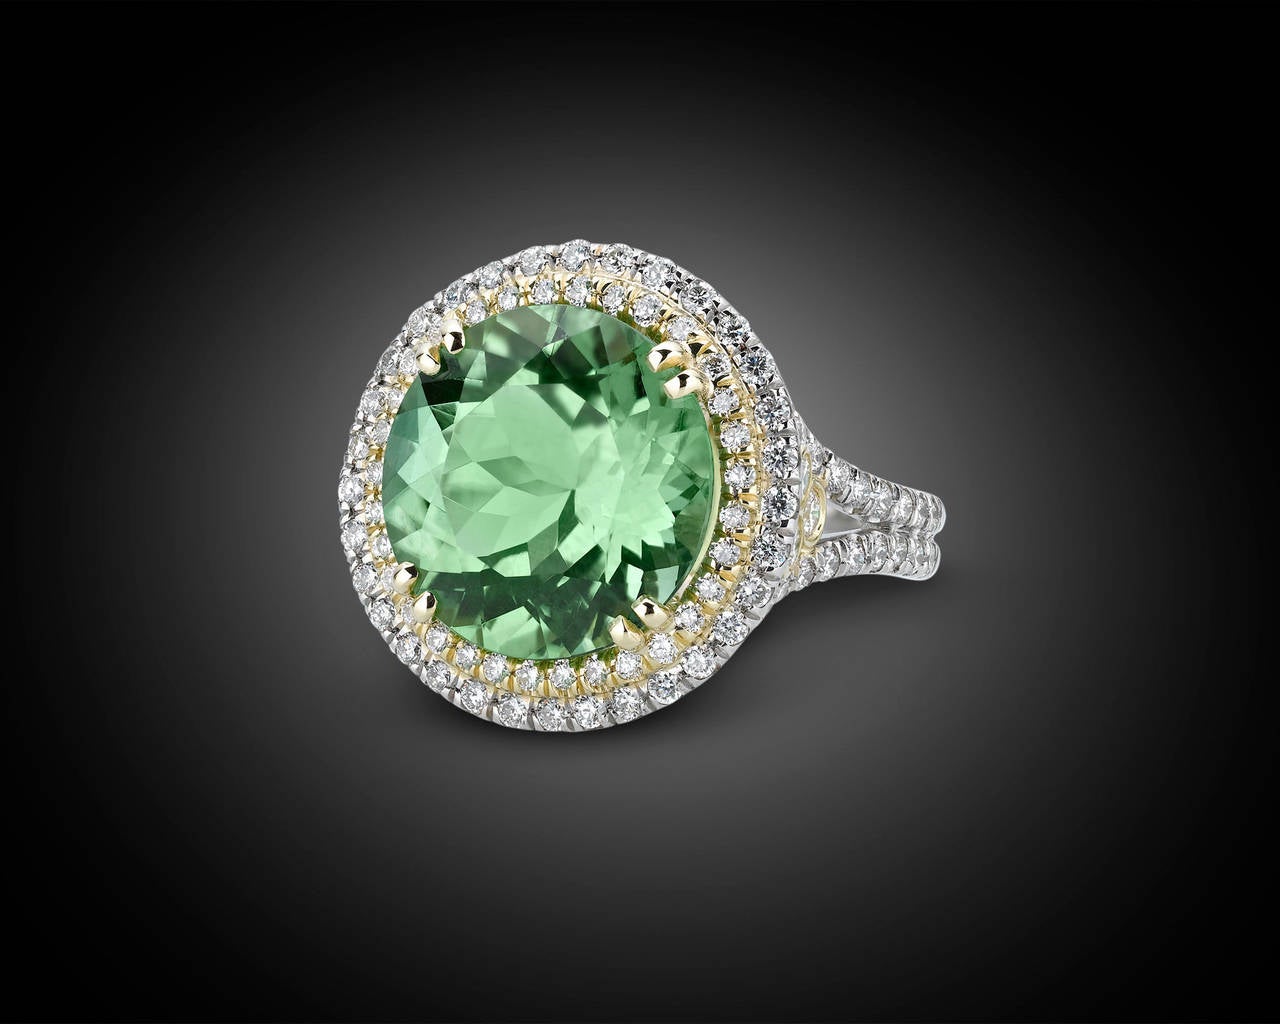 A radiant 8.06-carat Paraiba tourmaline is on display in this exquisite ring. Exhibiting a refreshing and incandescent light green hue, this round-cut gem is joined by a halo of approximately 1.04 total carats of diamonds. Set in platinum and 18k